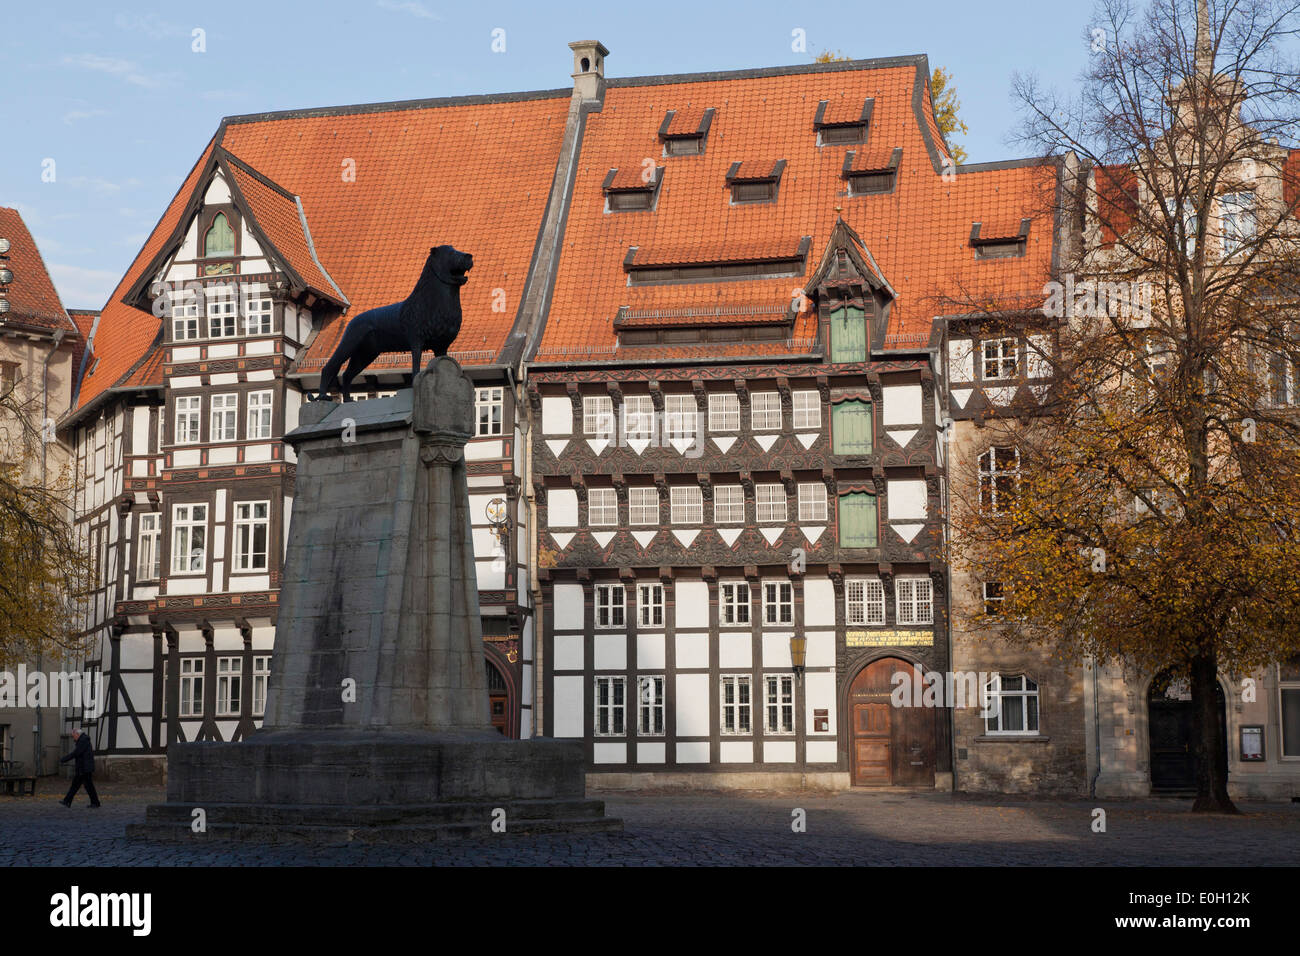 Old town square, Burgplatz with Henry the Lion sculpture and half-timbered house, Huneborstelsches Haus, Brunswick, Lower Saxony Stock Photo